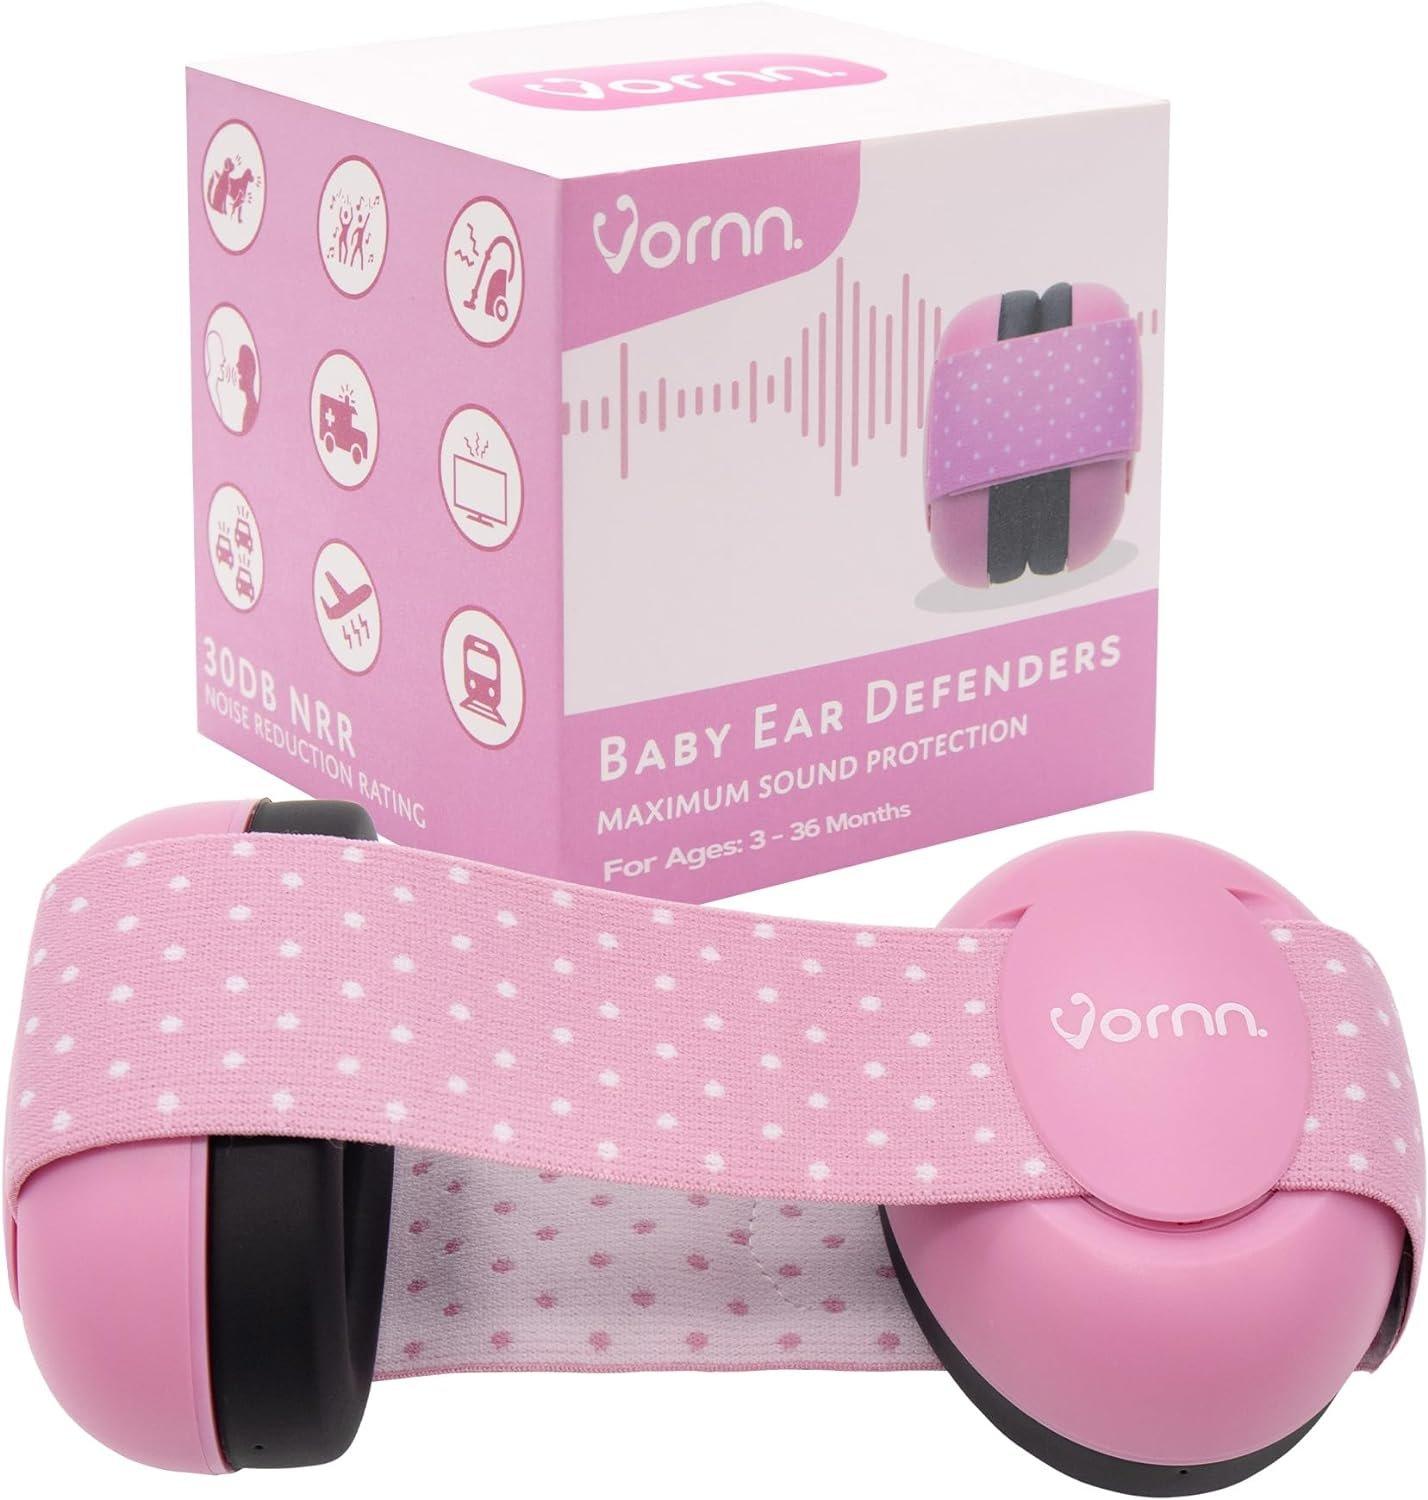 VORNN(r) Baby Ear Defenders for 0-36 Months and Soft and Adjustable - Infant Noise Cancelling Defenders, Pink Ear Muffs